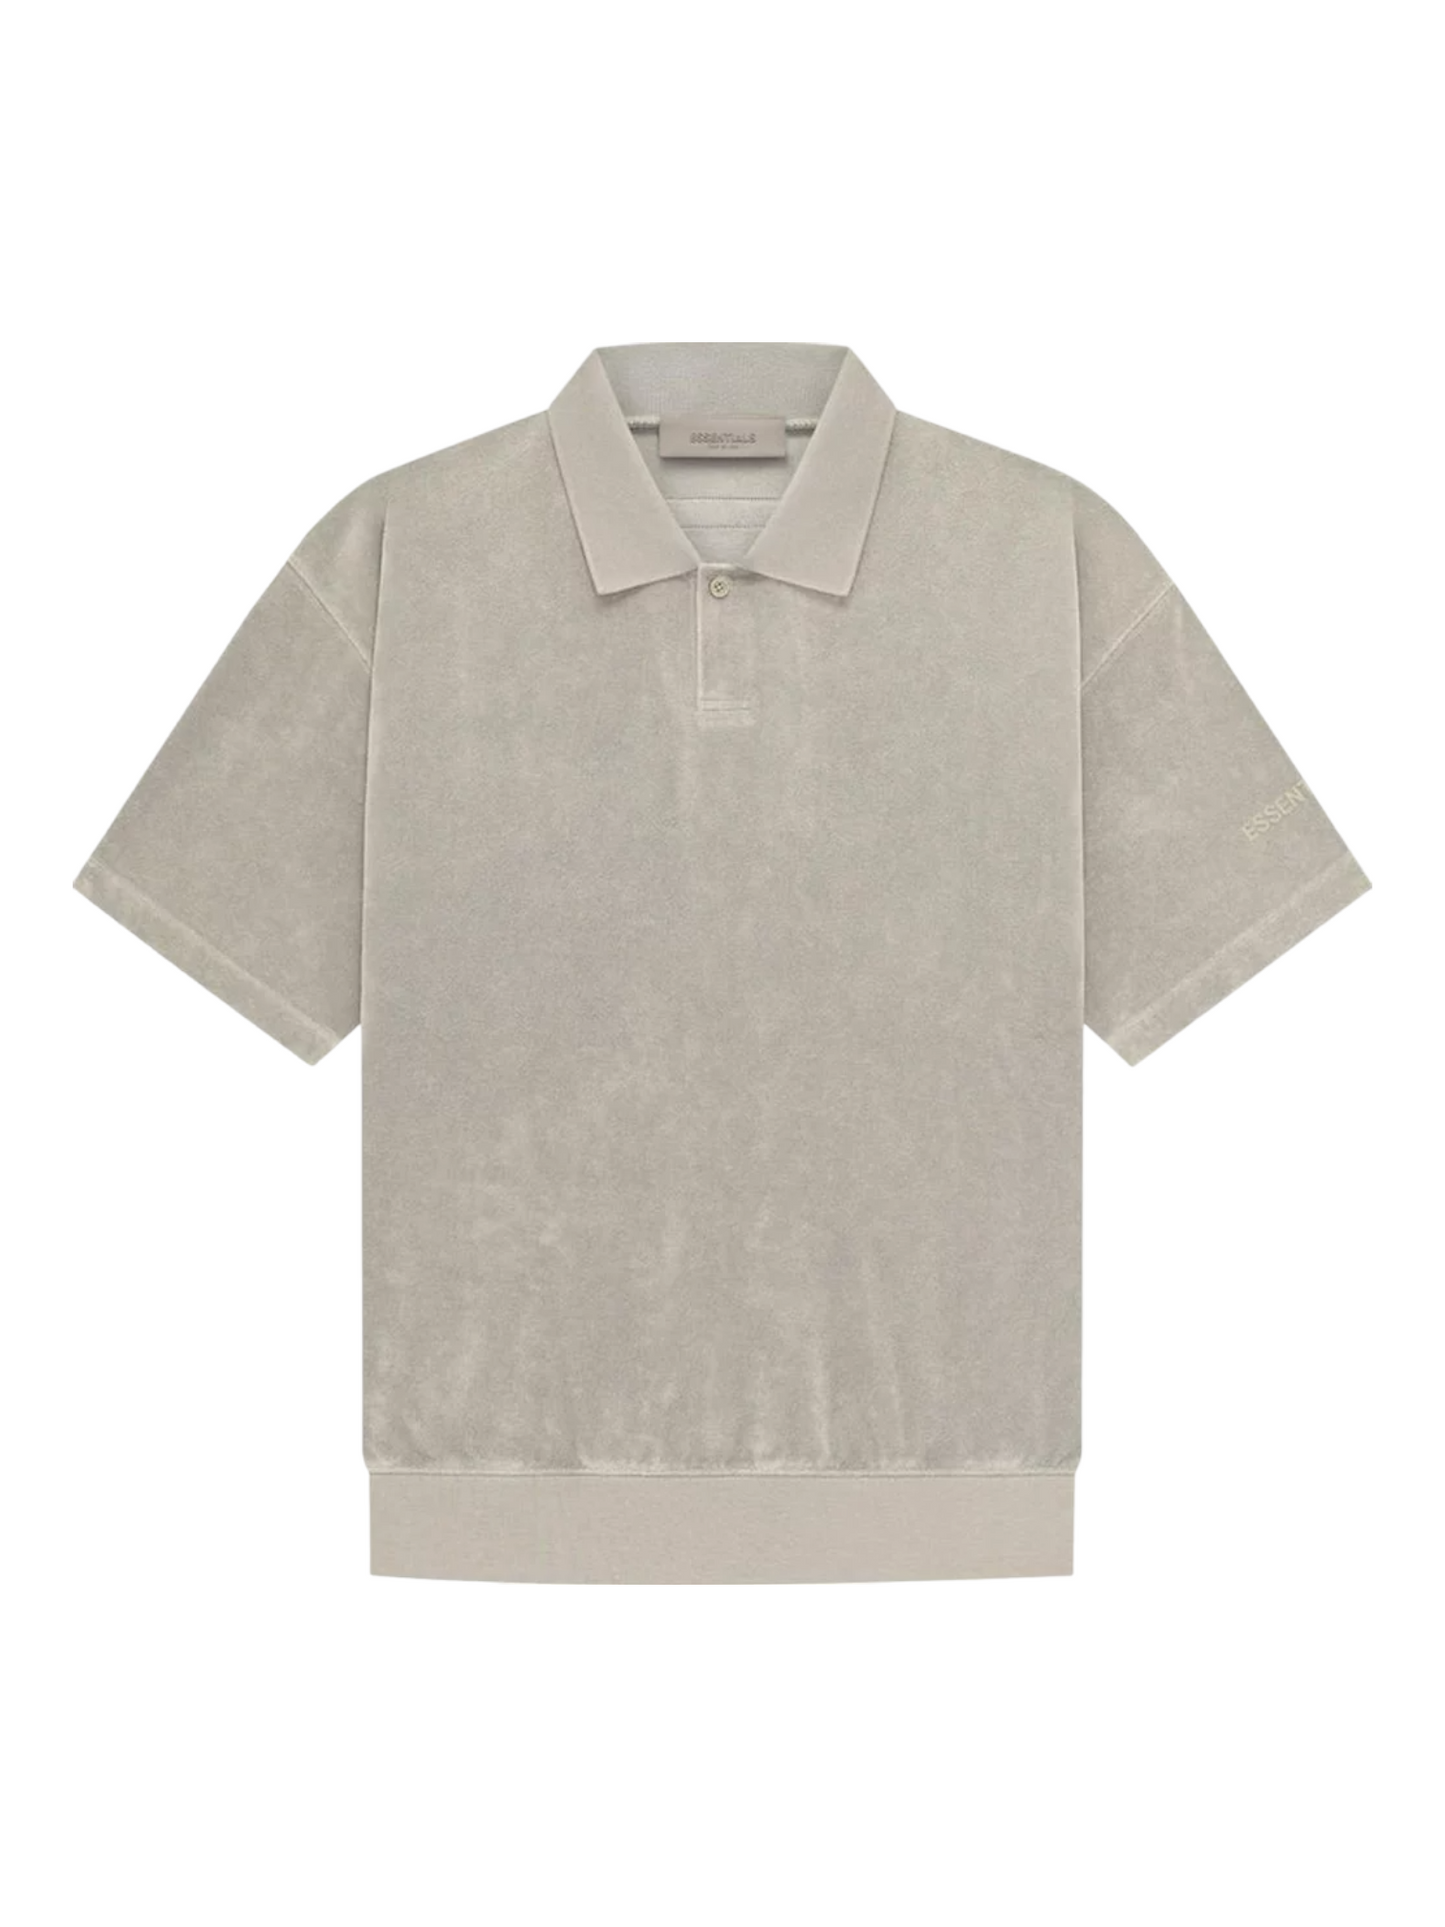 Essentials Fear of God Sycamore Short Sleeve Terry Cloth Polo SS23  — Genuine Design Luxury Consignment Calgary, Canada New & Pre-Owned Authentic Clothing, Shoes, Accessories.